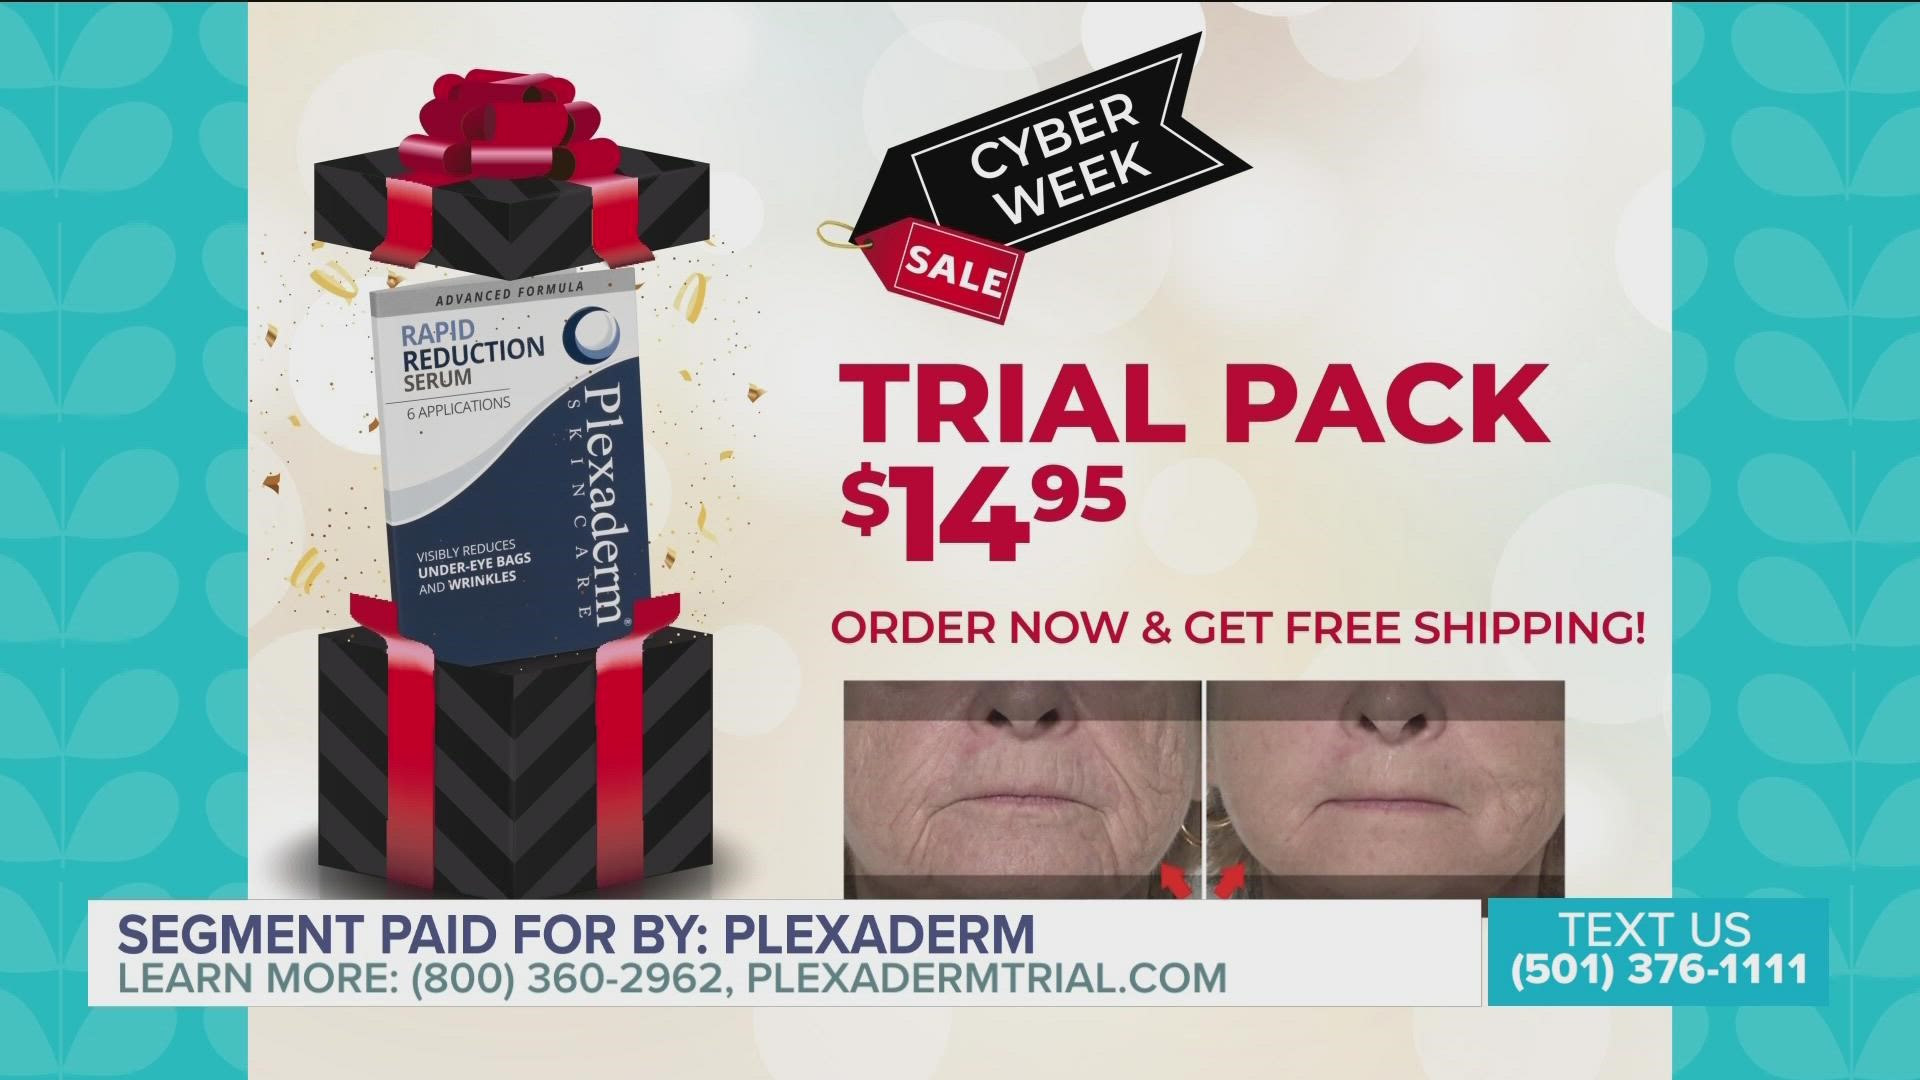 SEGMENT PAID FOR BY PLEXADERM: Plexaderm Skincare is offering a Black Friday special! Get a trial pack for just $14.95 plus free shipping.